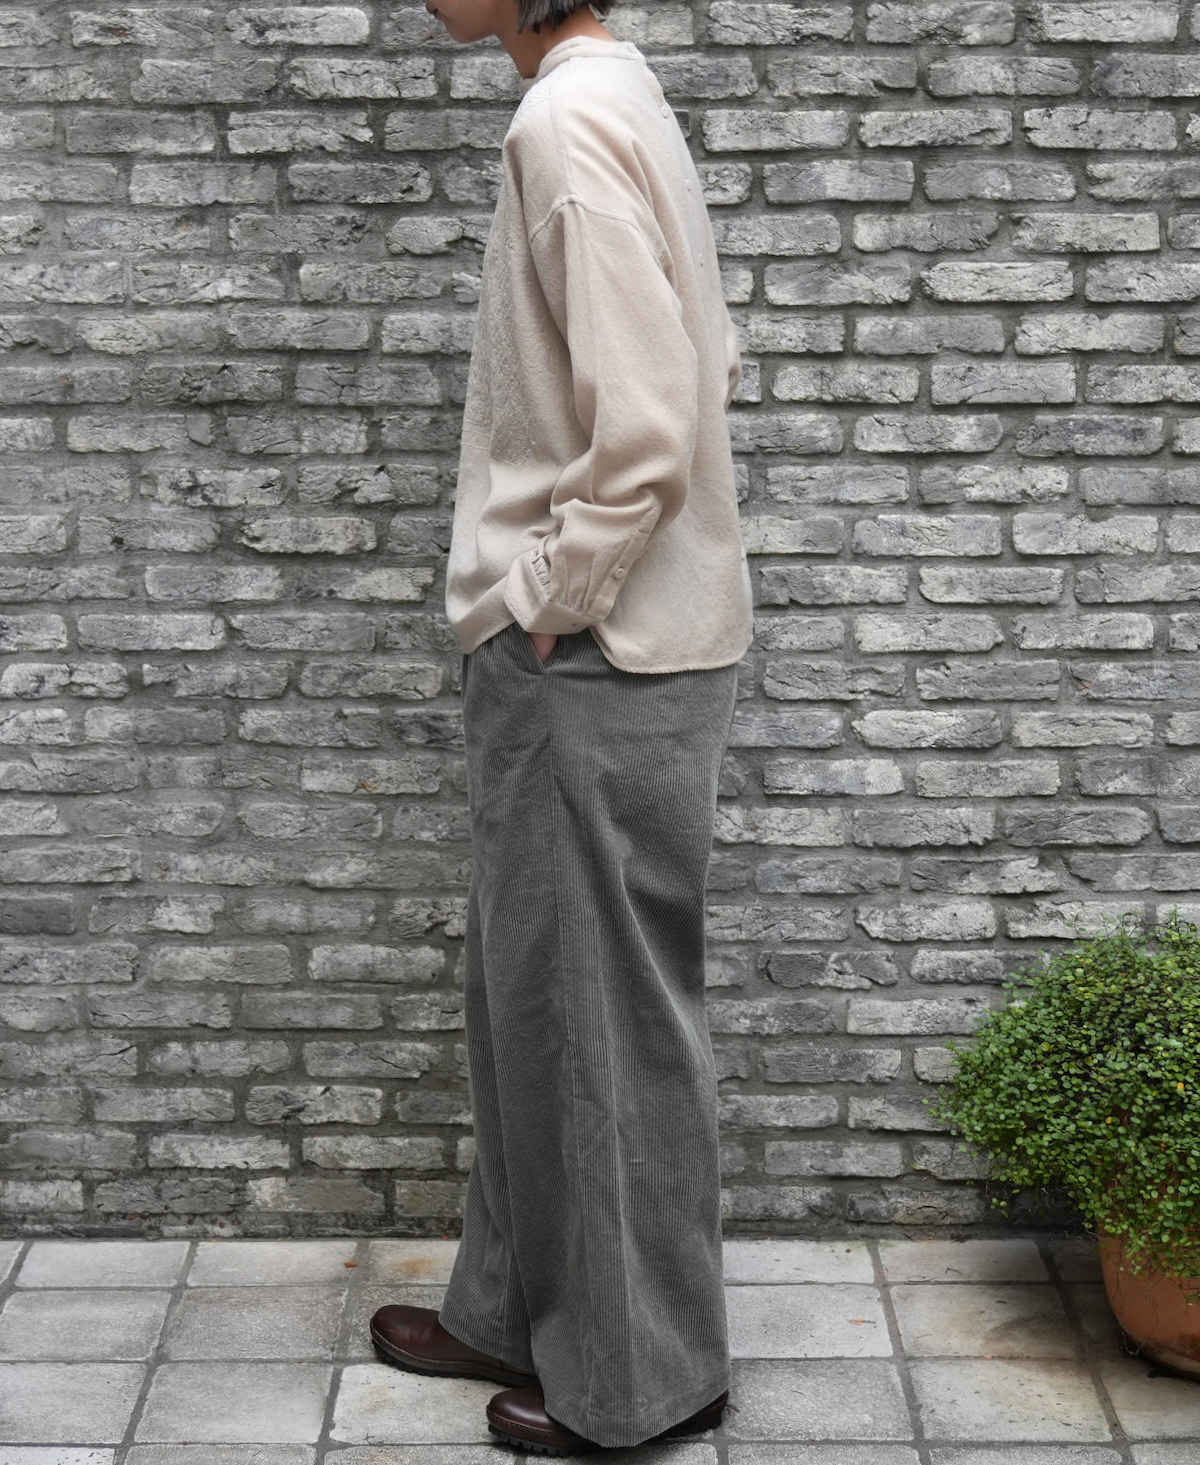 GNMDS2052CR (パンツ) TROUSERS/8WALE CORDUROY EASY WIDE PANTS